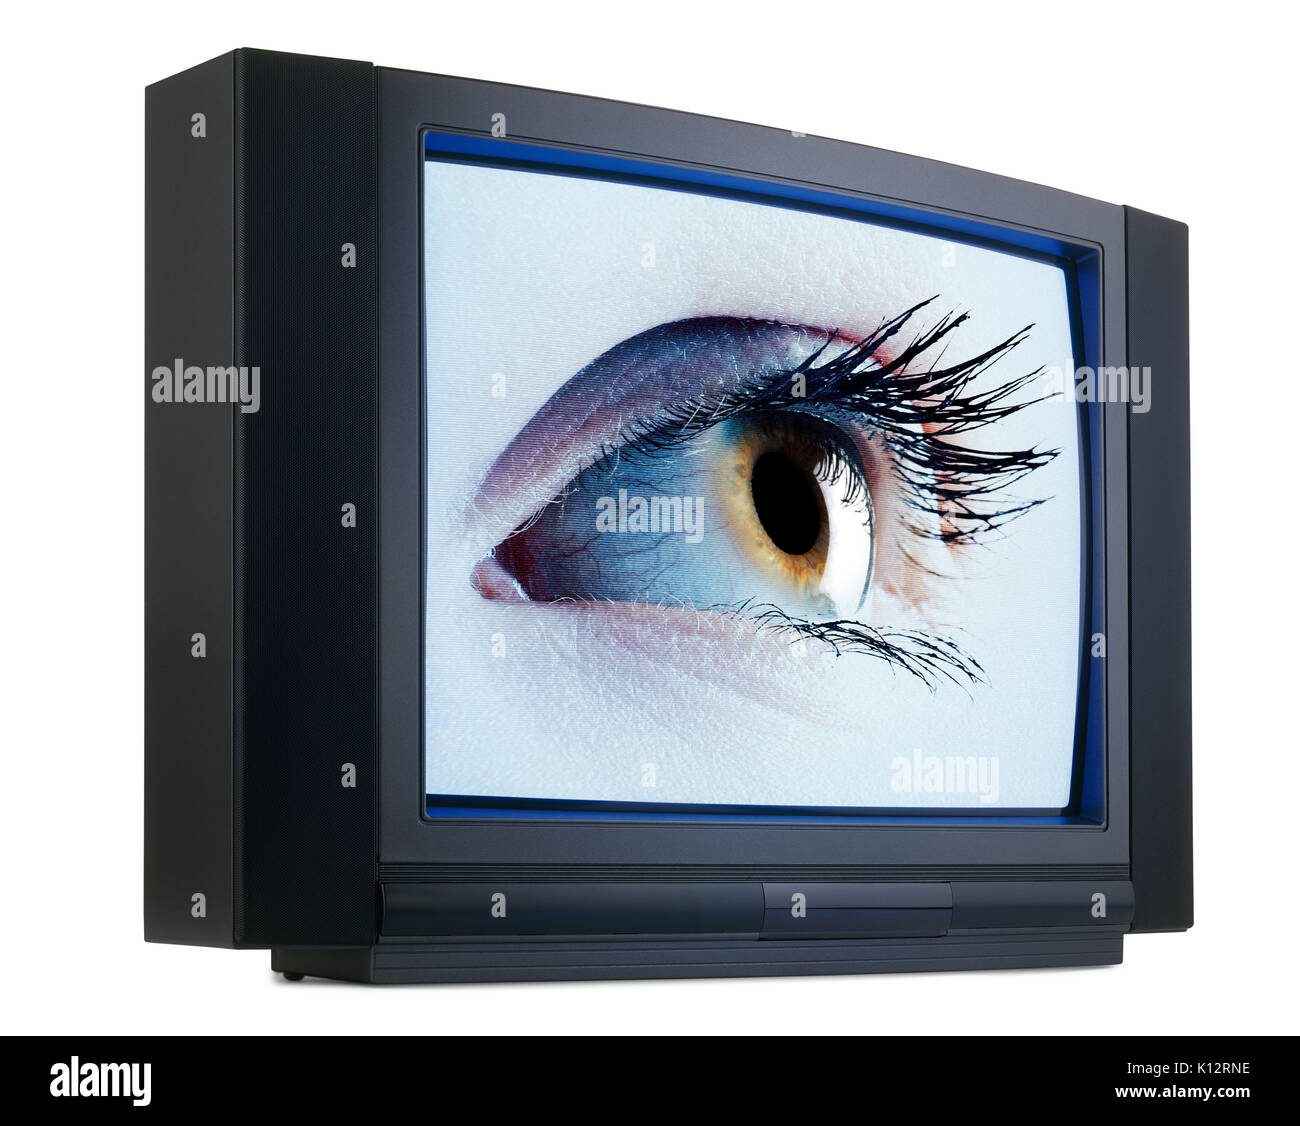 Old fashioned television with green iris eyes isolated on white with clipping path Stock Photo